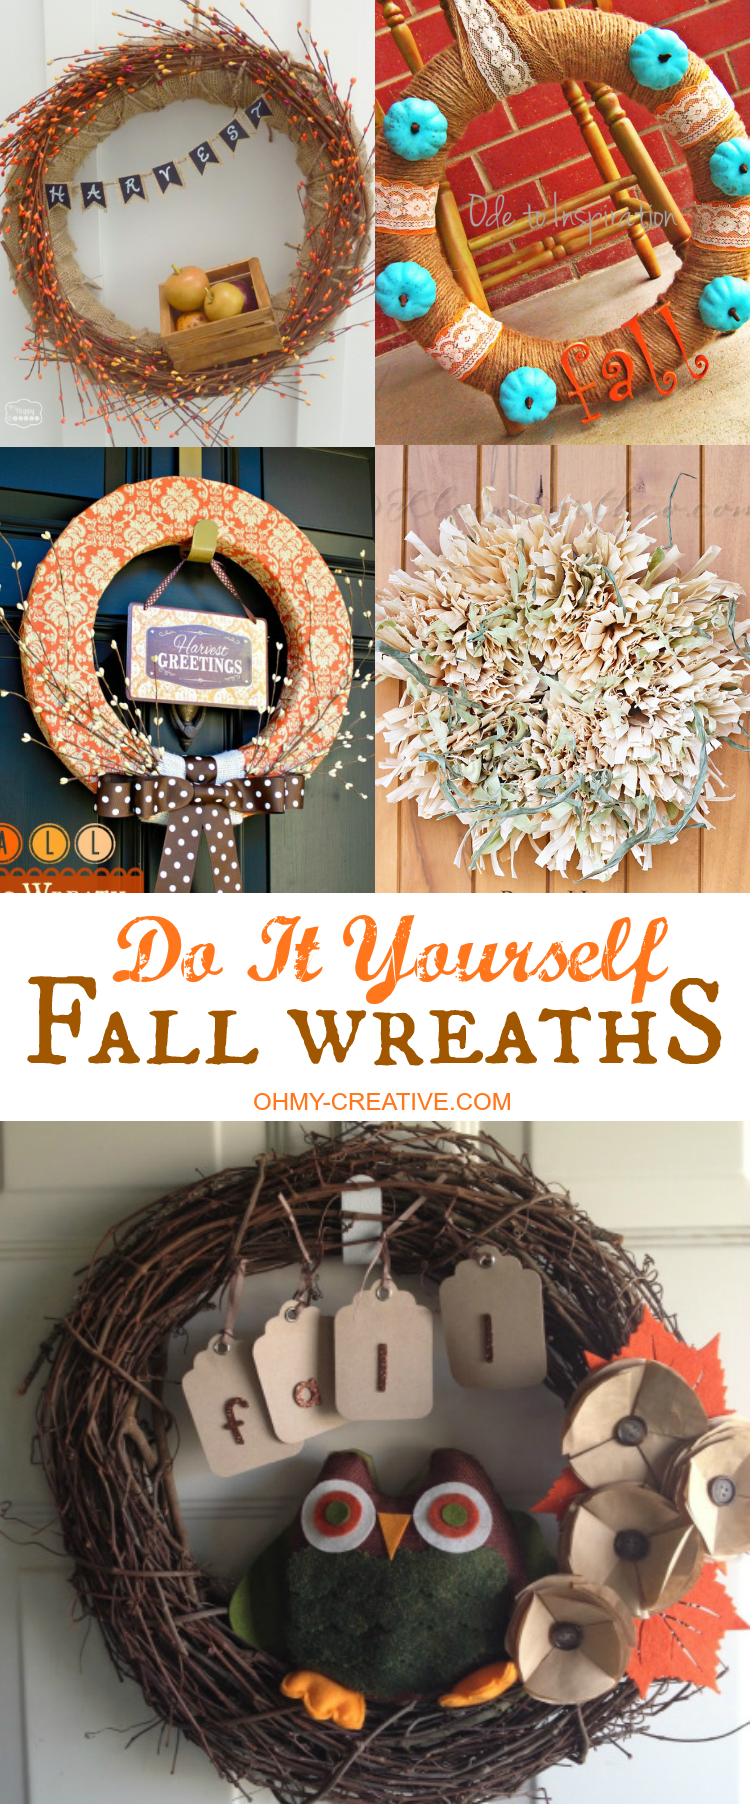 Fall is the perfect time to decorate the front of the house. Start with one of these creative Do It Yourself Fall Wreaths for the front door, add a few pots of mums and pumpkins and have a beautiful display to welcome guests! | OHMY-CREATIVE.COM